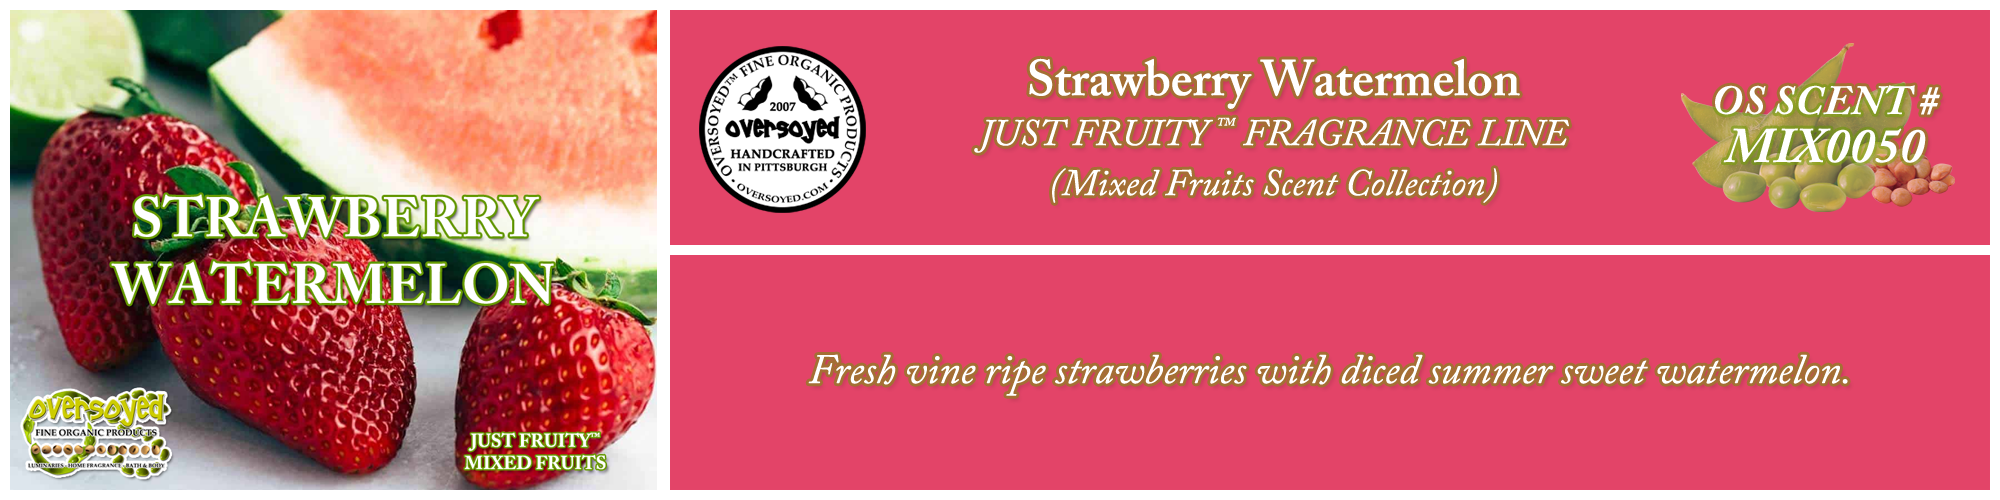 Strawberry Watermelon Handcrafted Products Collection